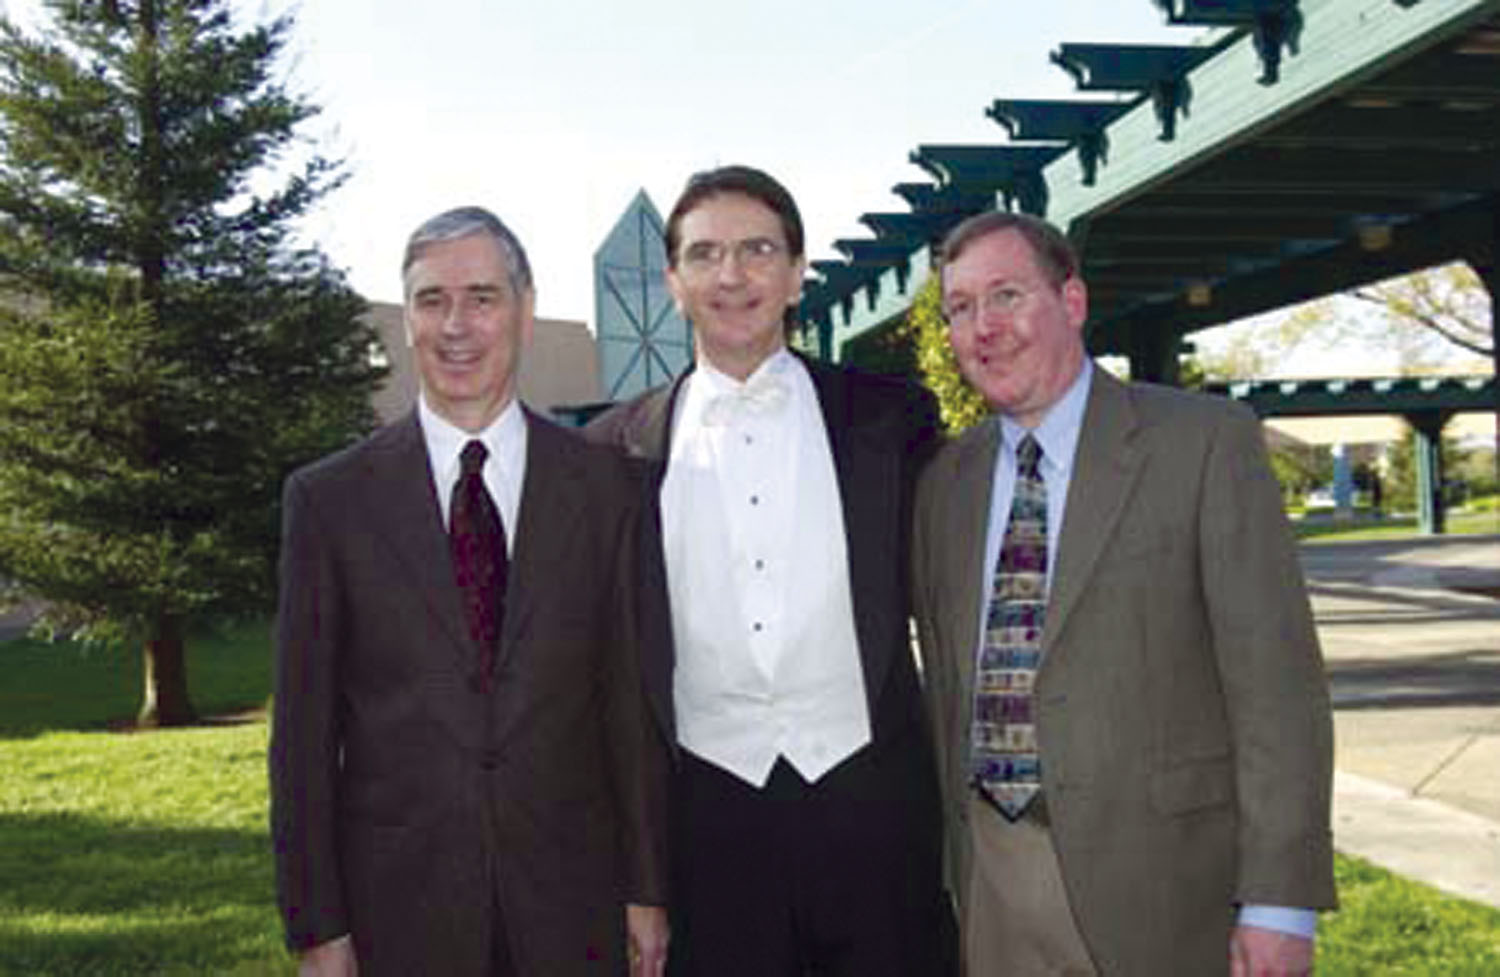 Walter Mays, Victor Markovich and Dean Roush